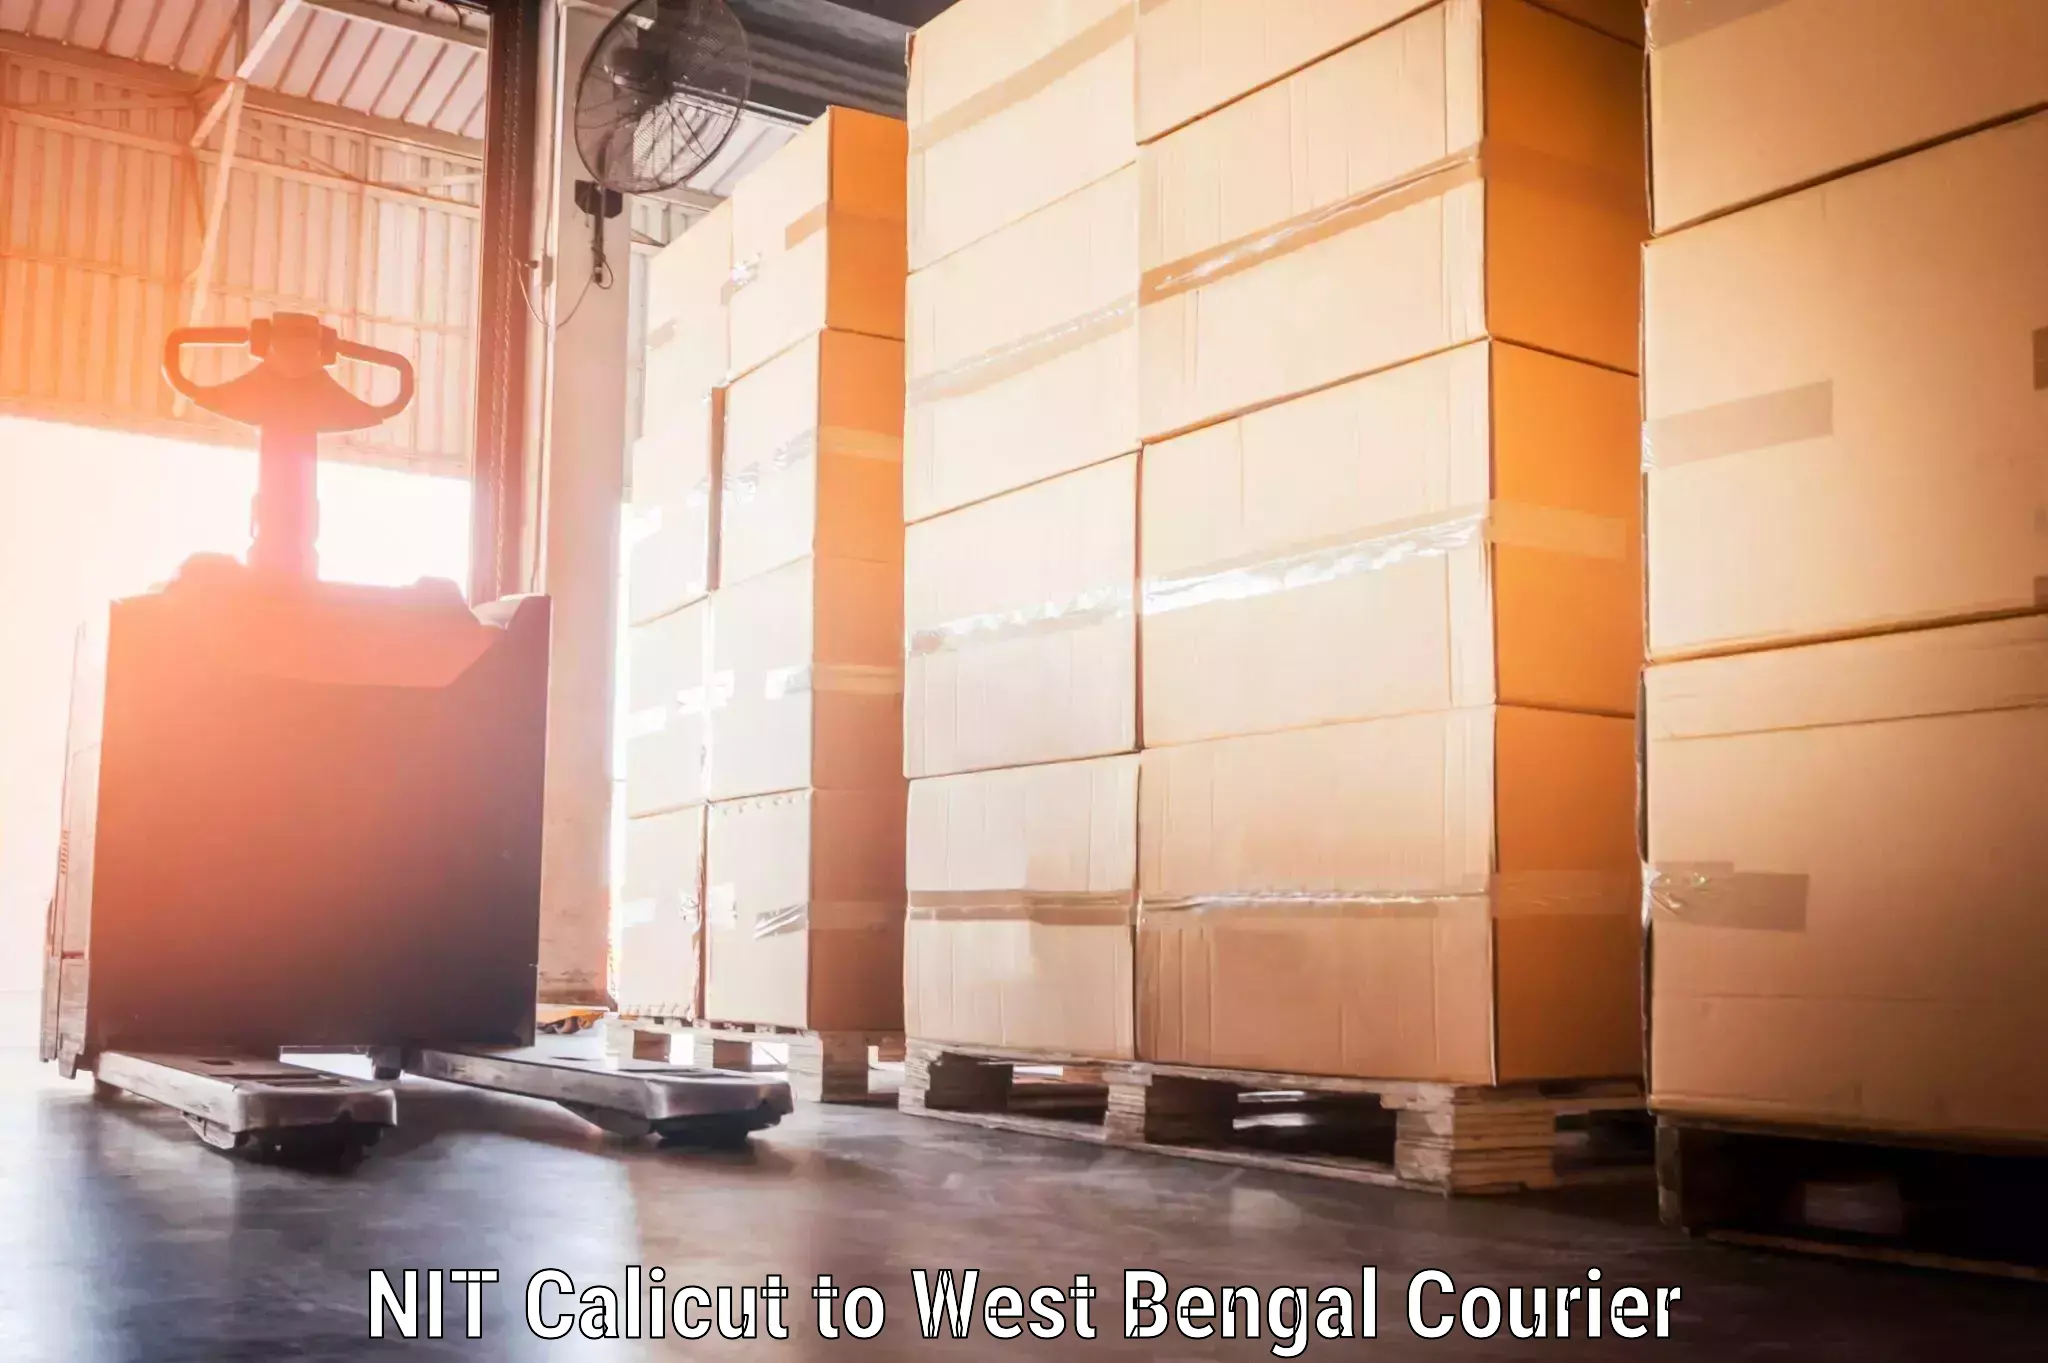 Luggage shipping specialists NIT Calicut to North 24 Parganas